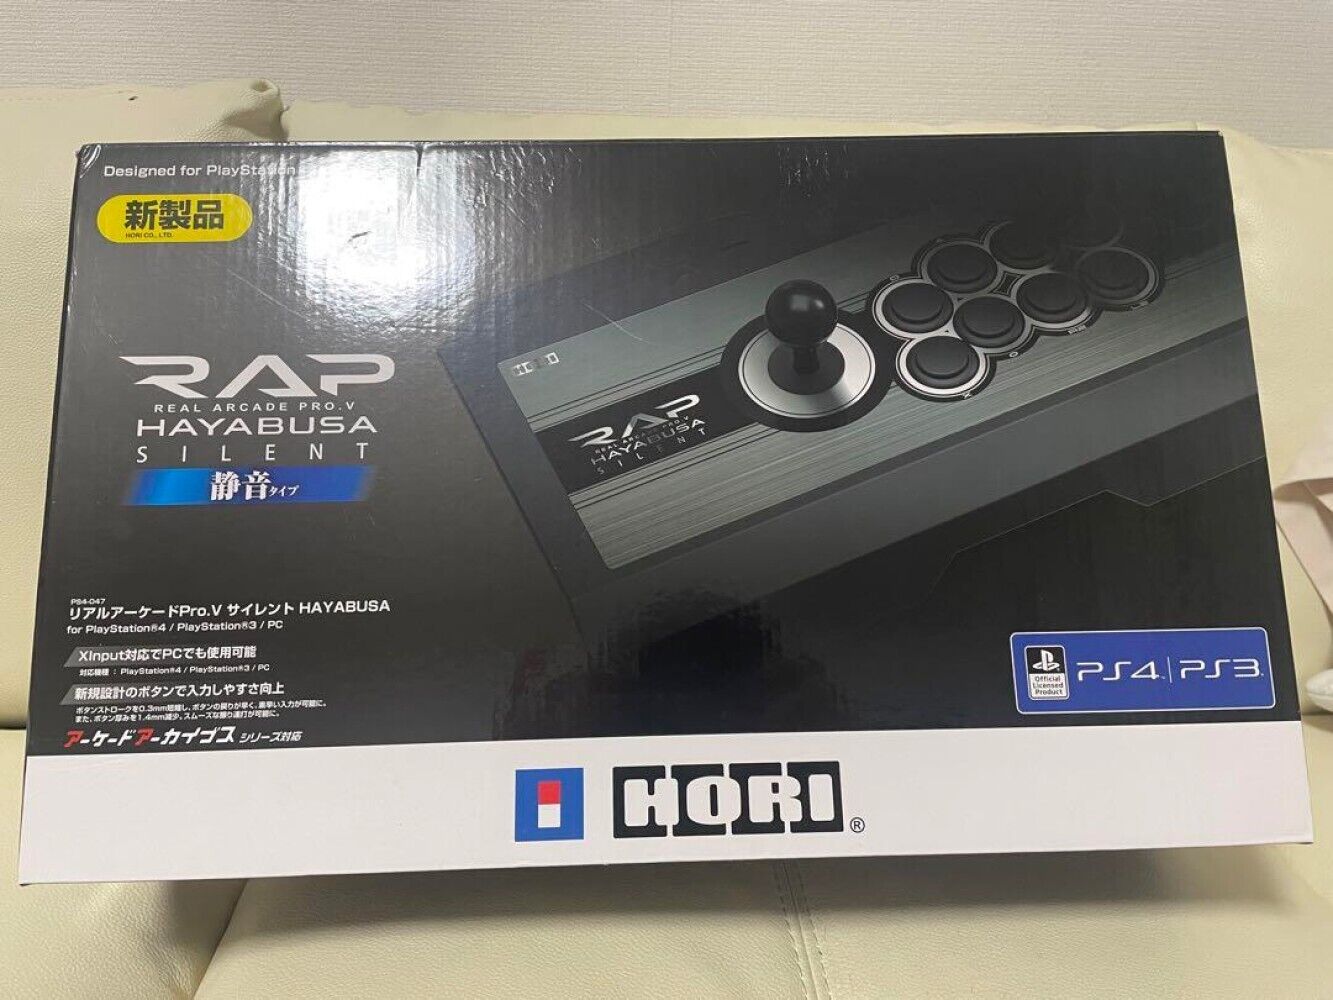 Ps5 Operation Confirmed Real Arcade Pro.V Hayabusa Replaced